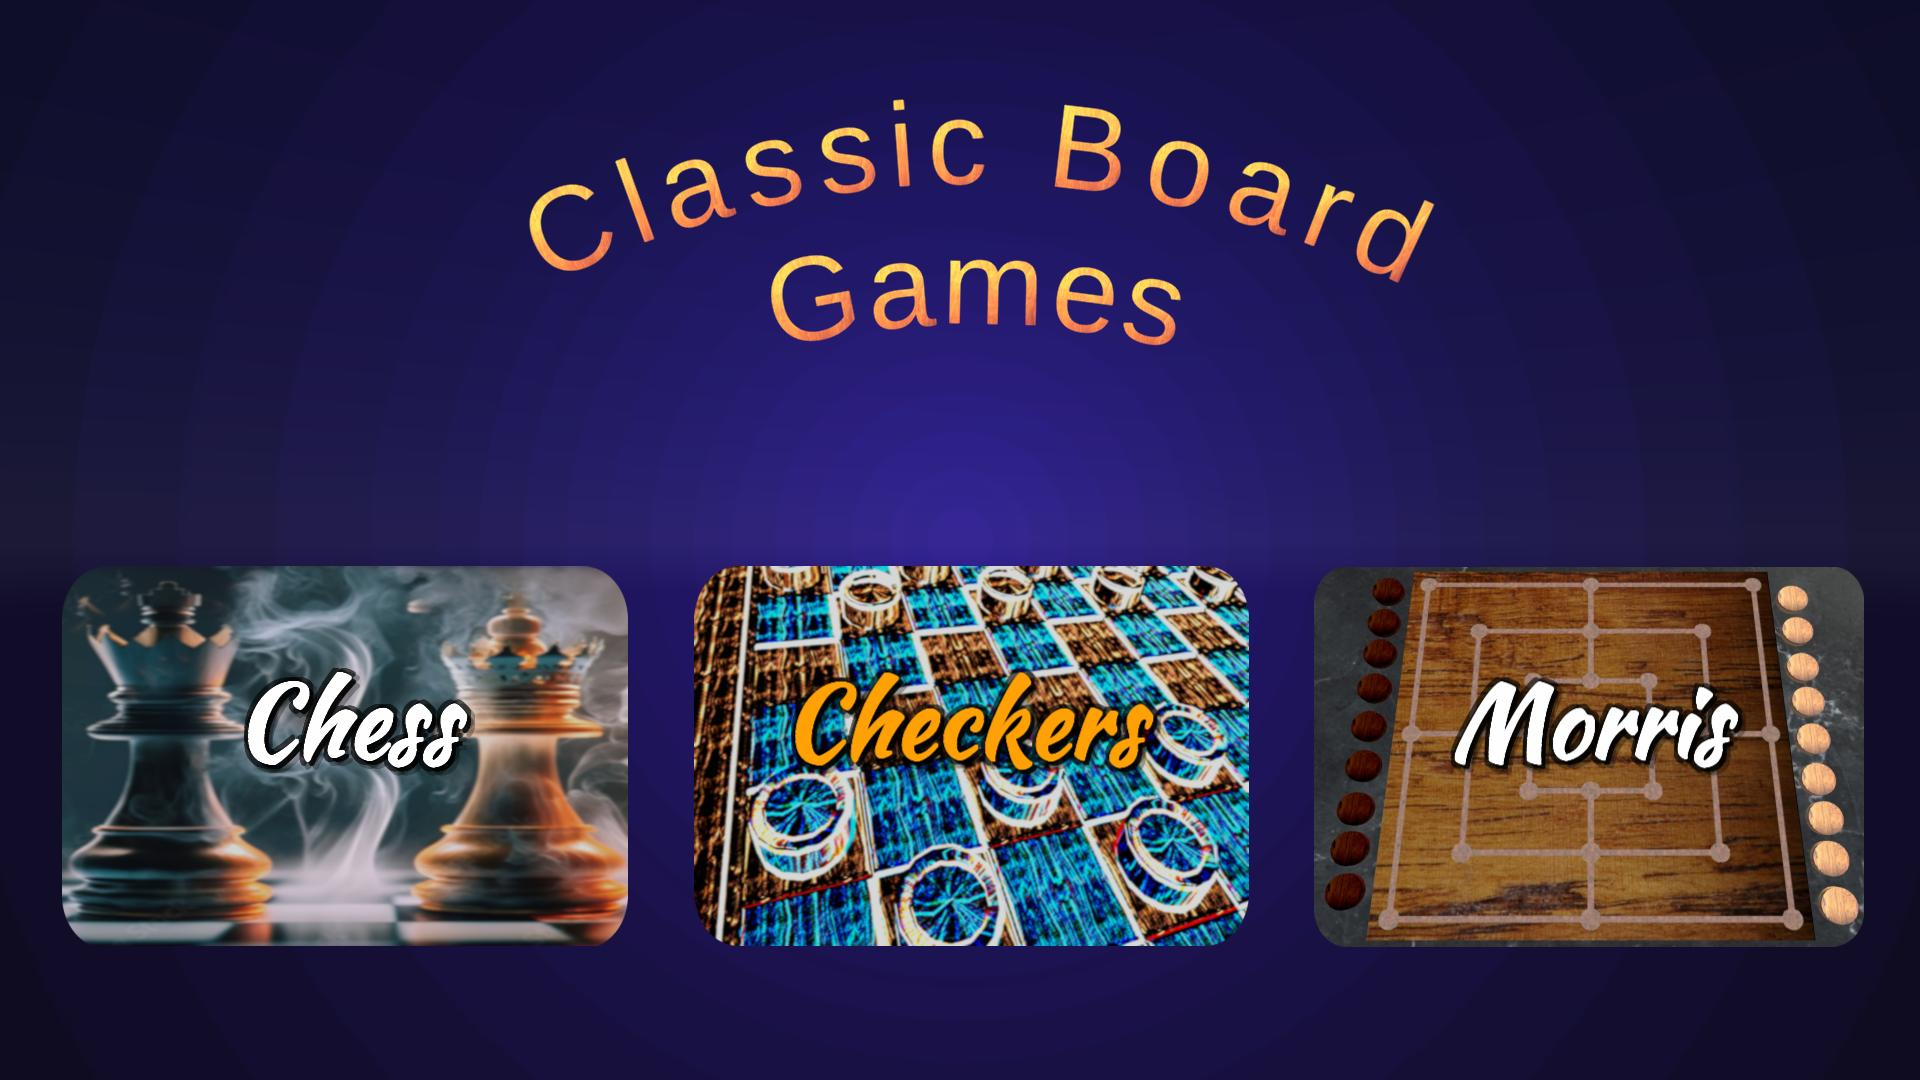 MS Classic Board Games - PC Review and Full Download